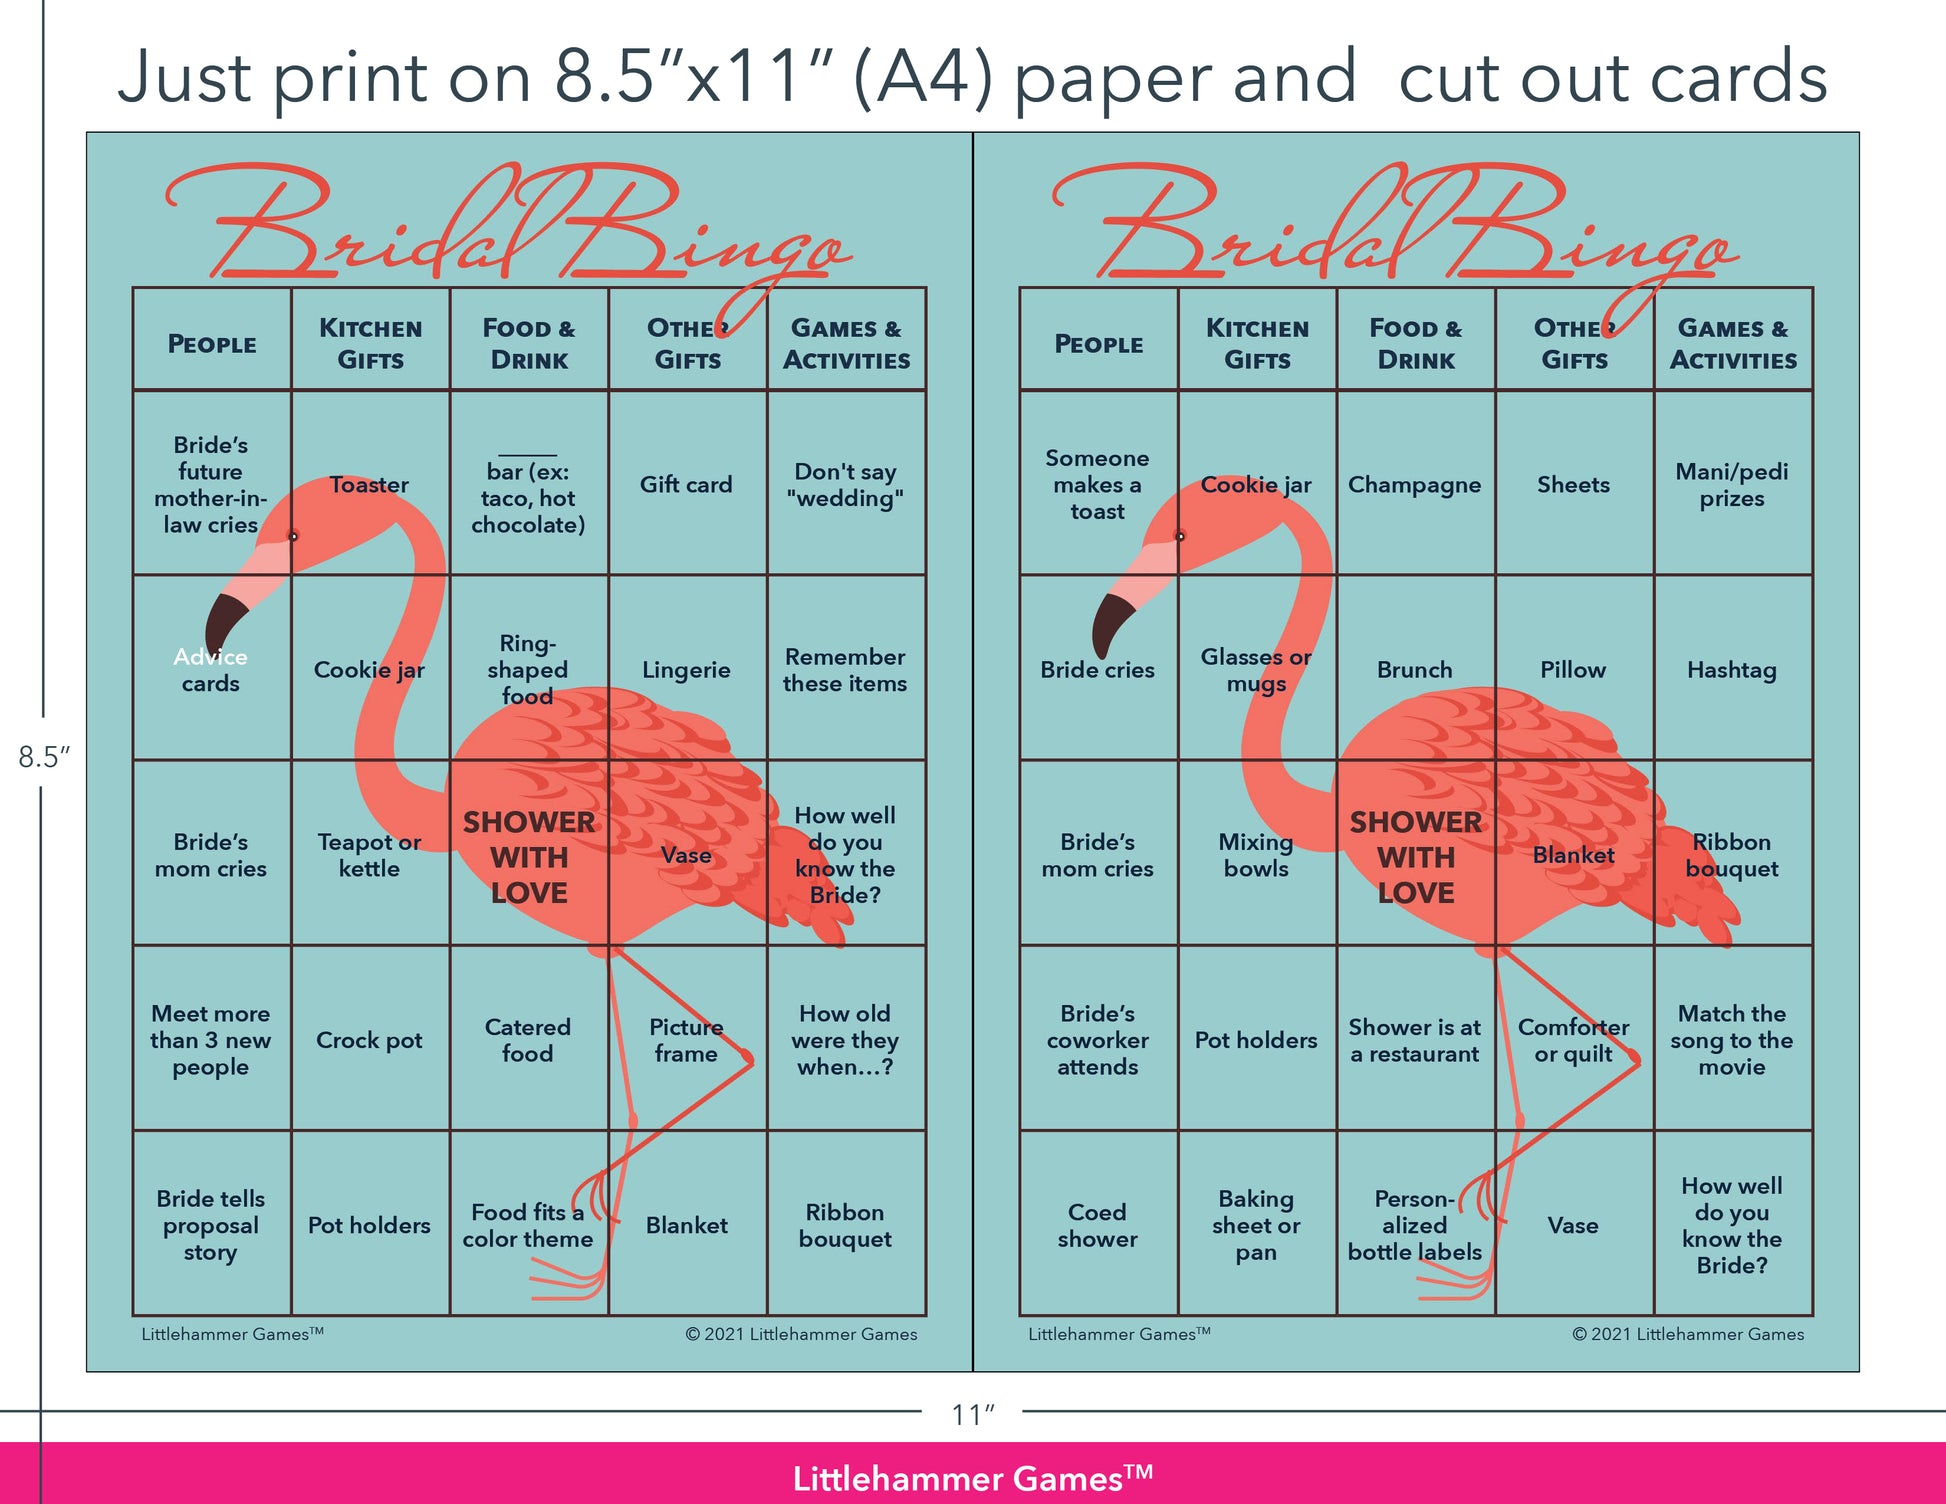 Flamingo-themed Bridal Bingo game cards with printing instructions